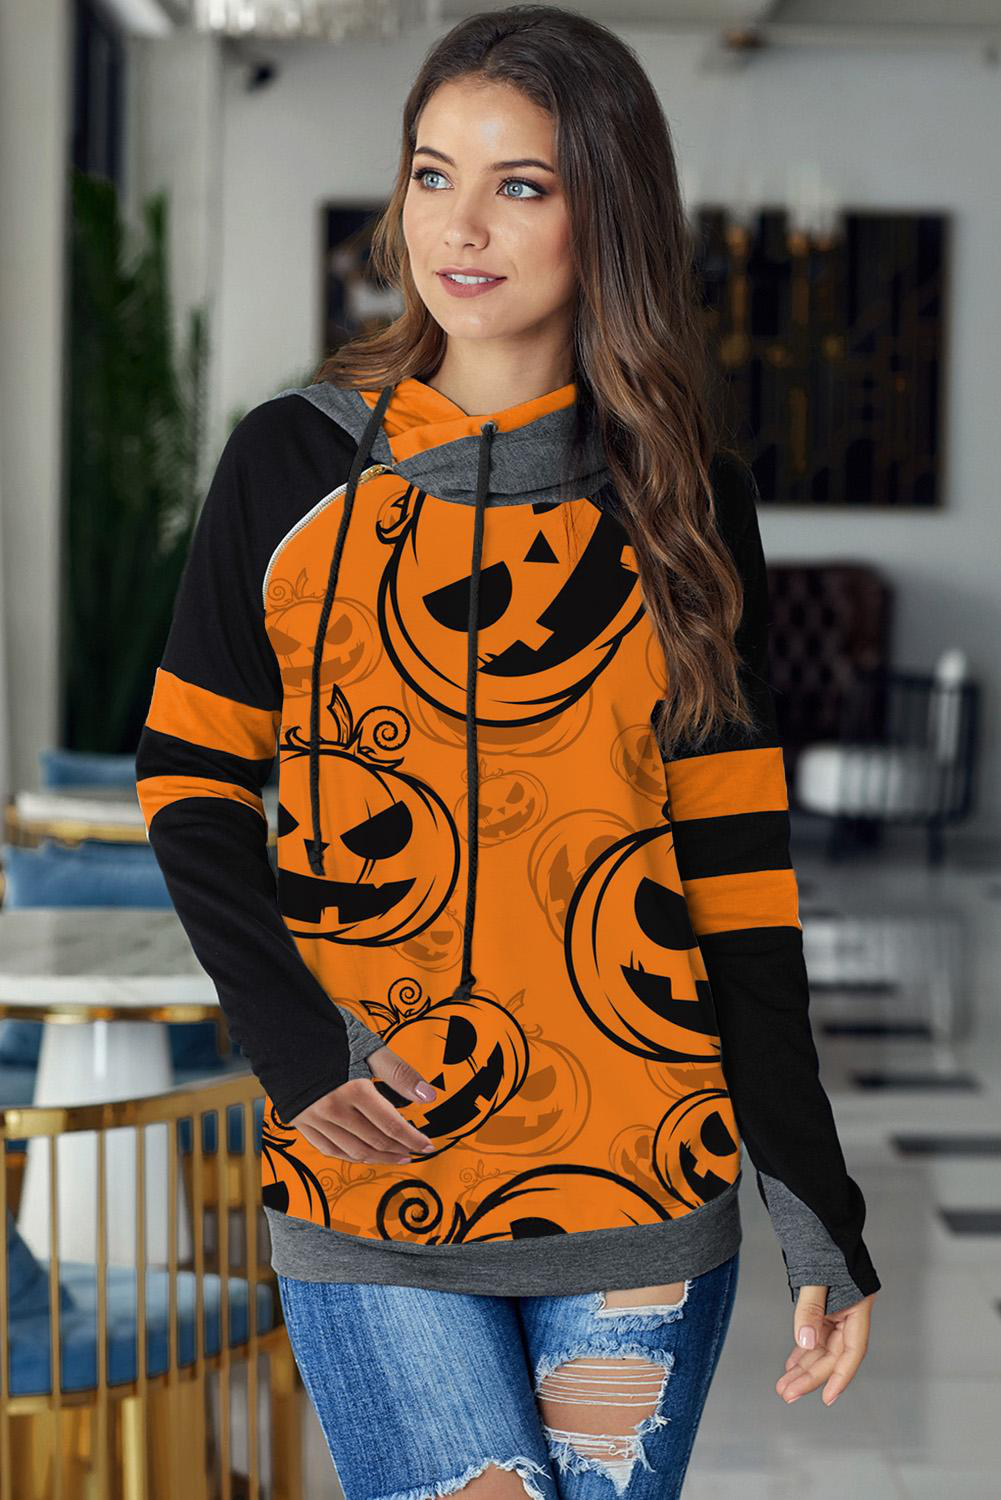 Orange Halloween Pumpkin Hoodie Brought To You By Officially Sexy